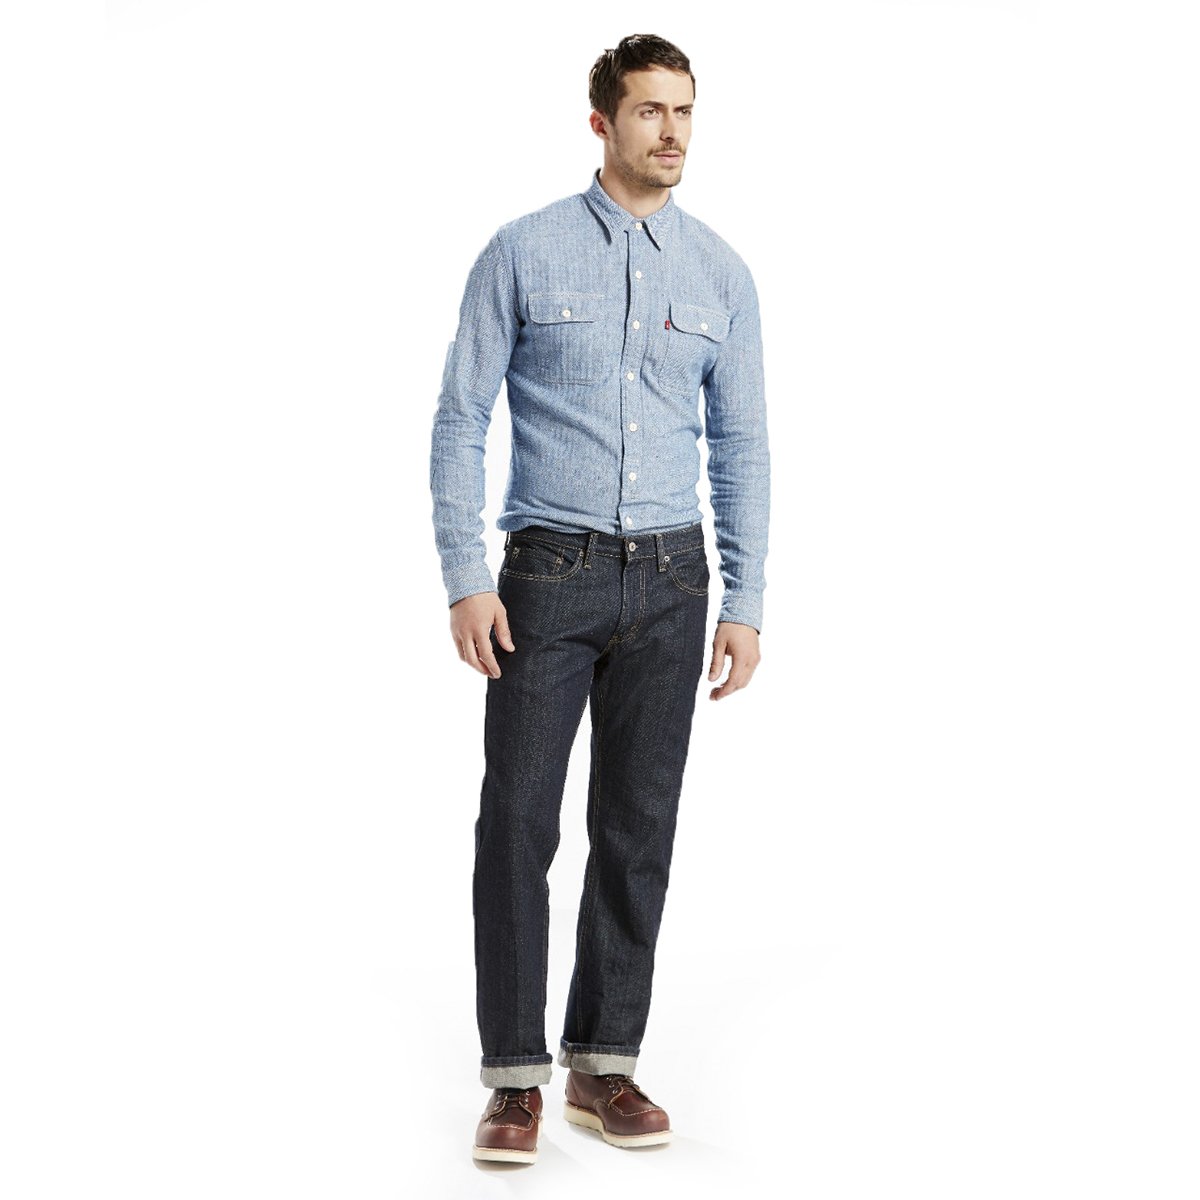 Jeans 559 Relaxed Straight Fit Levi's para Caballero